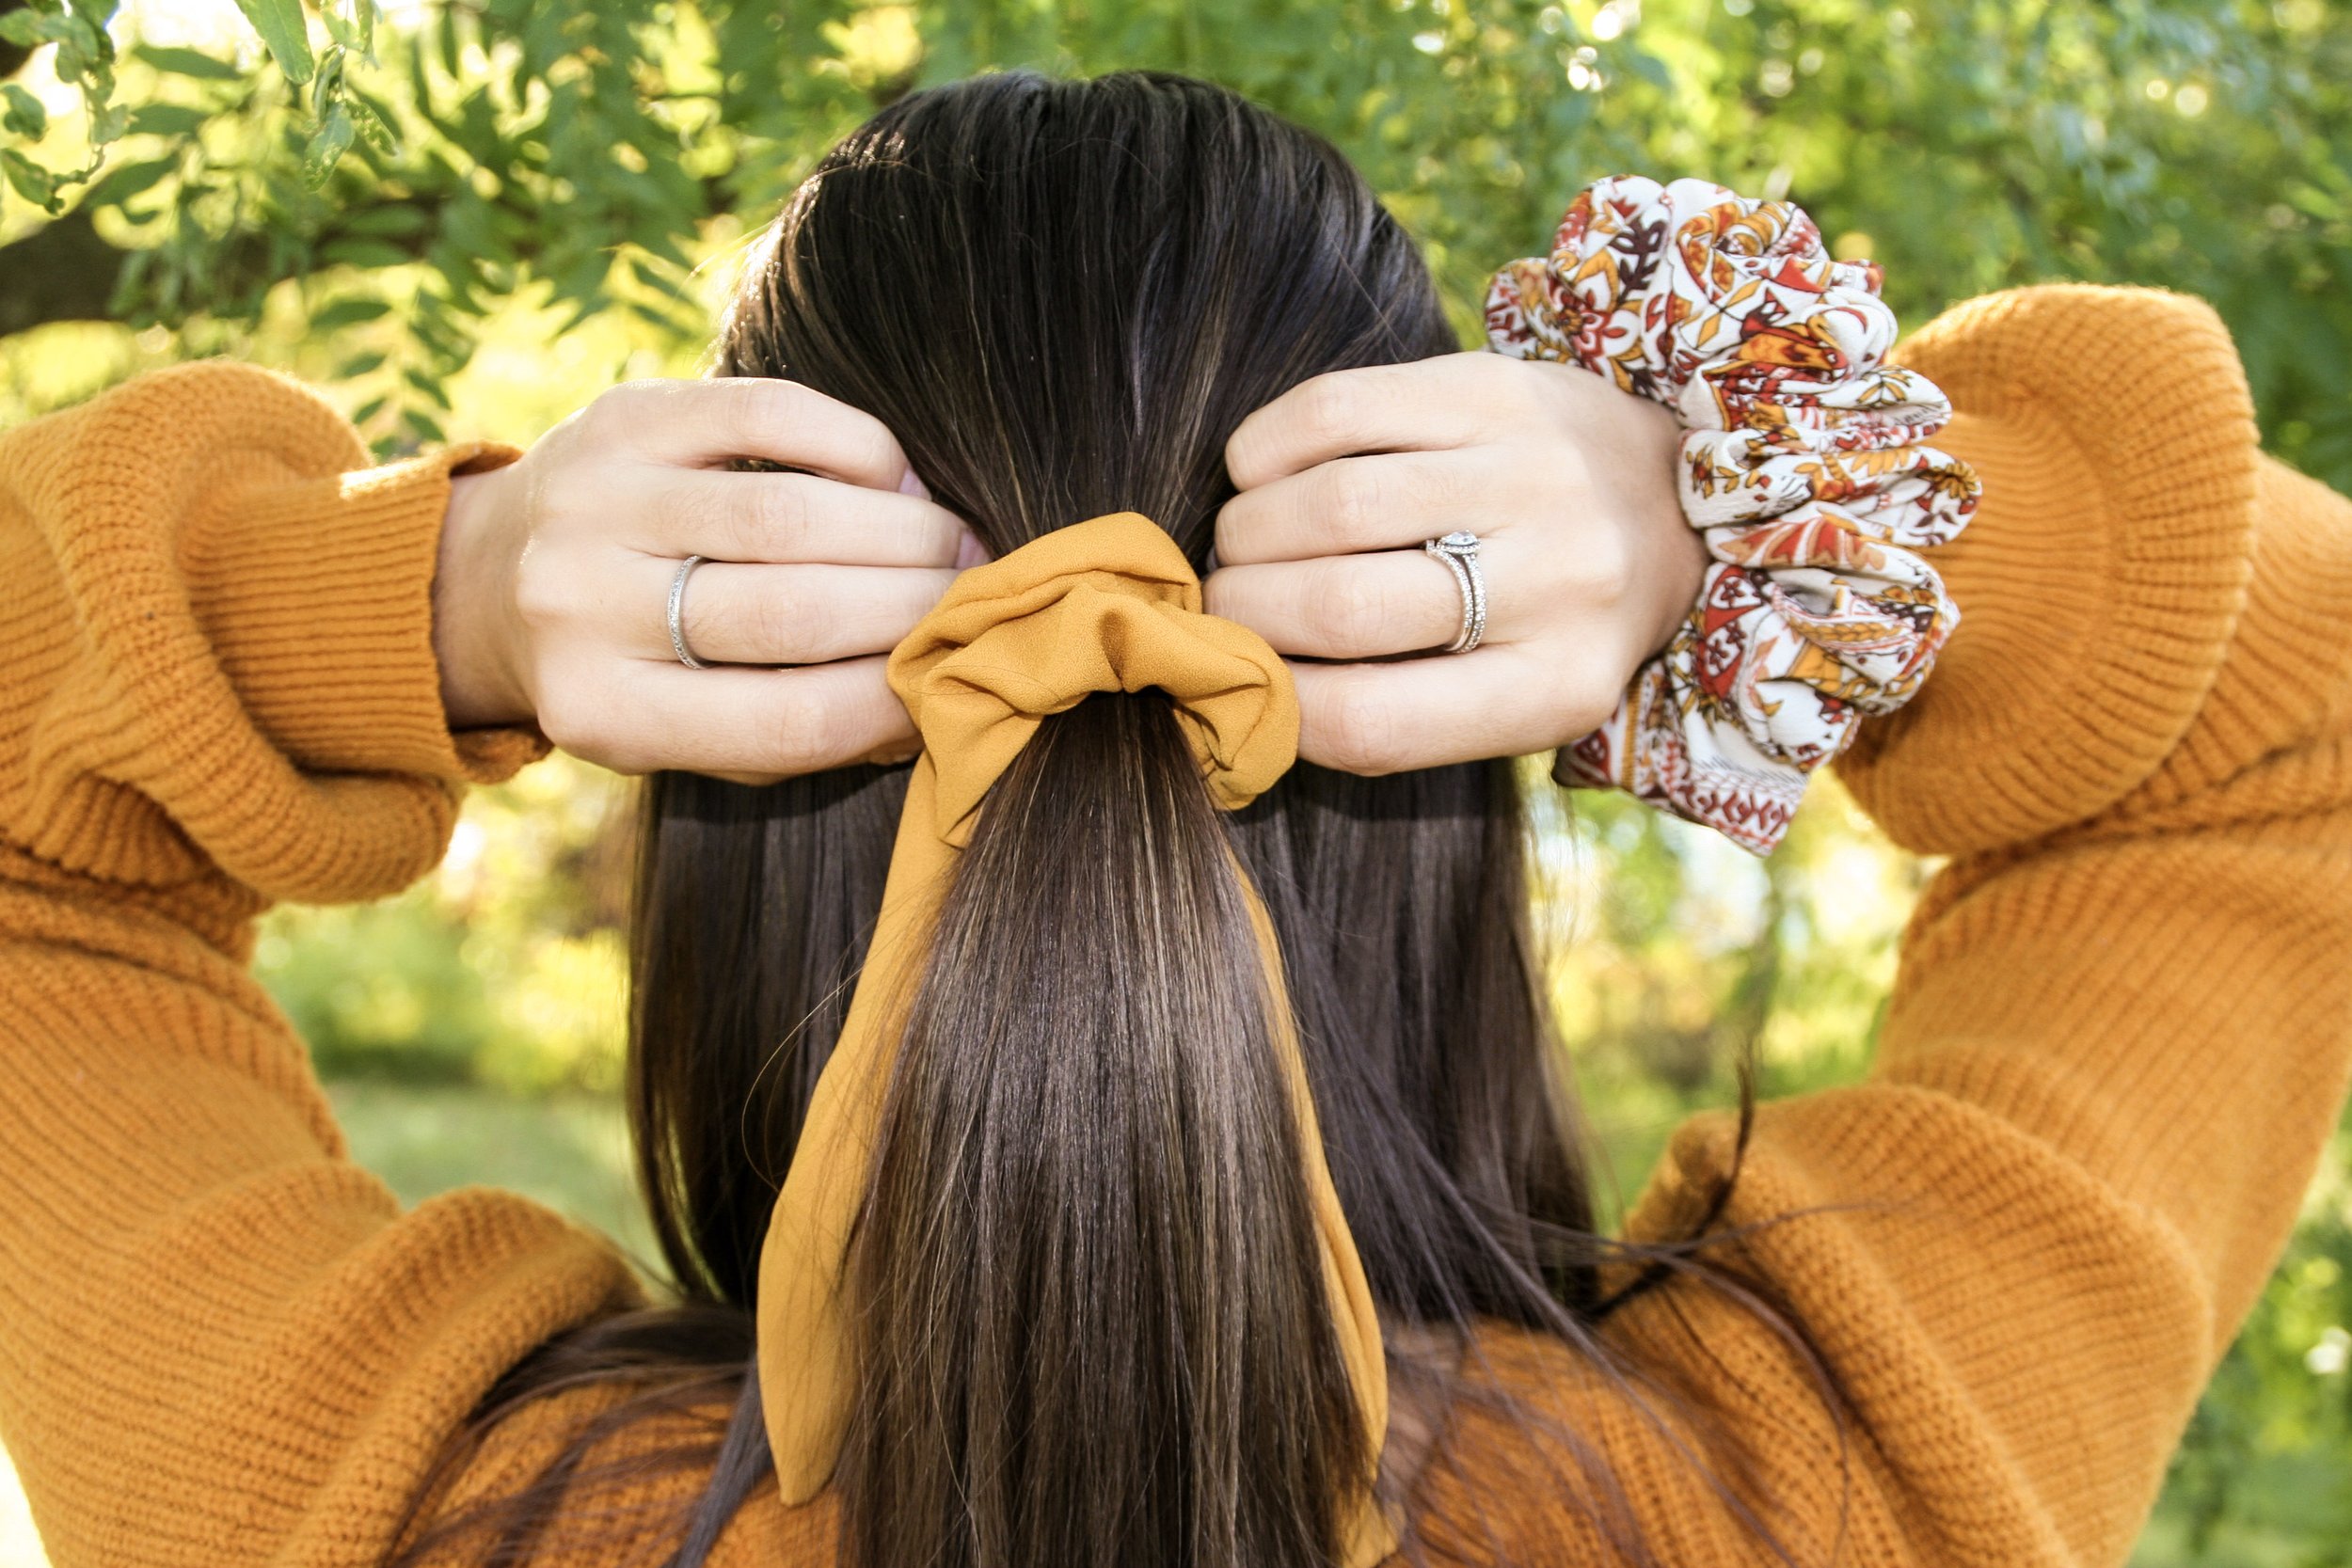 Camille bow hair clip - Mustard - Scrunchie is back